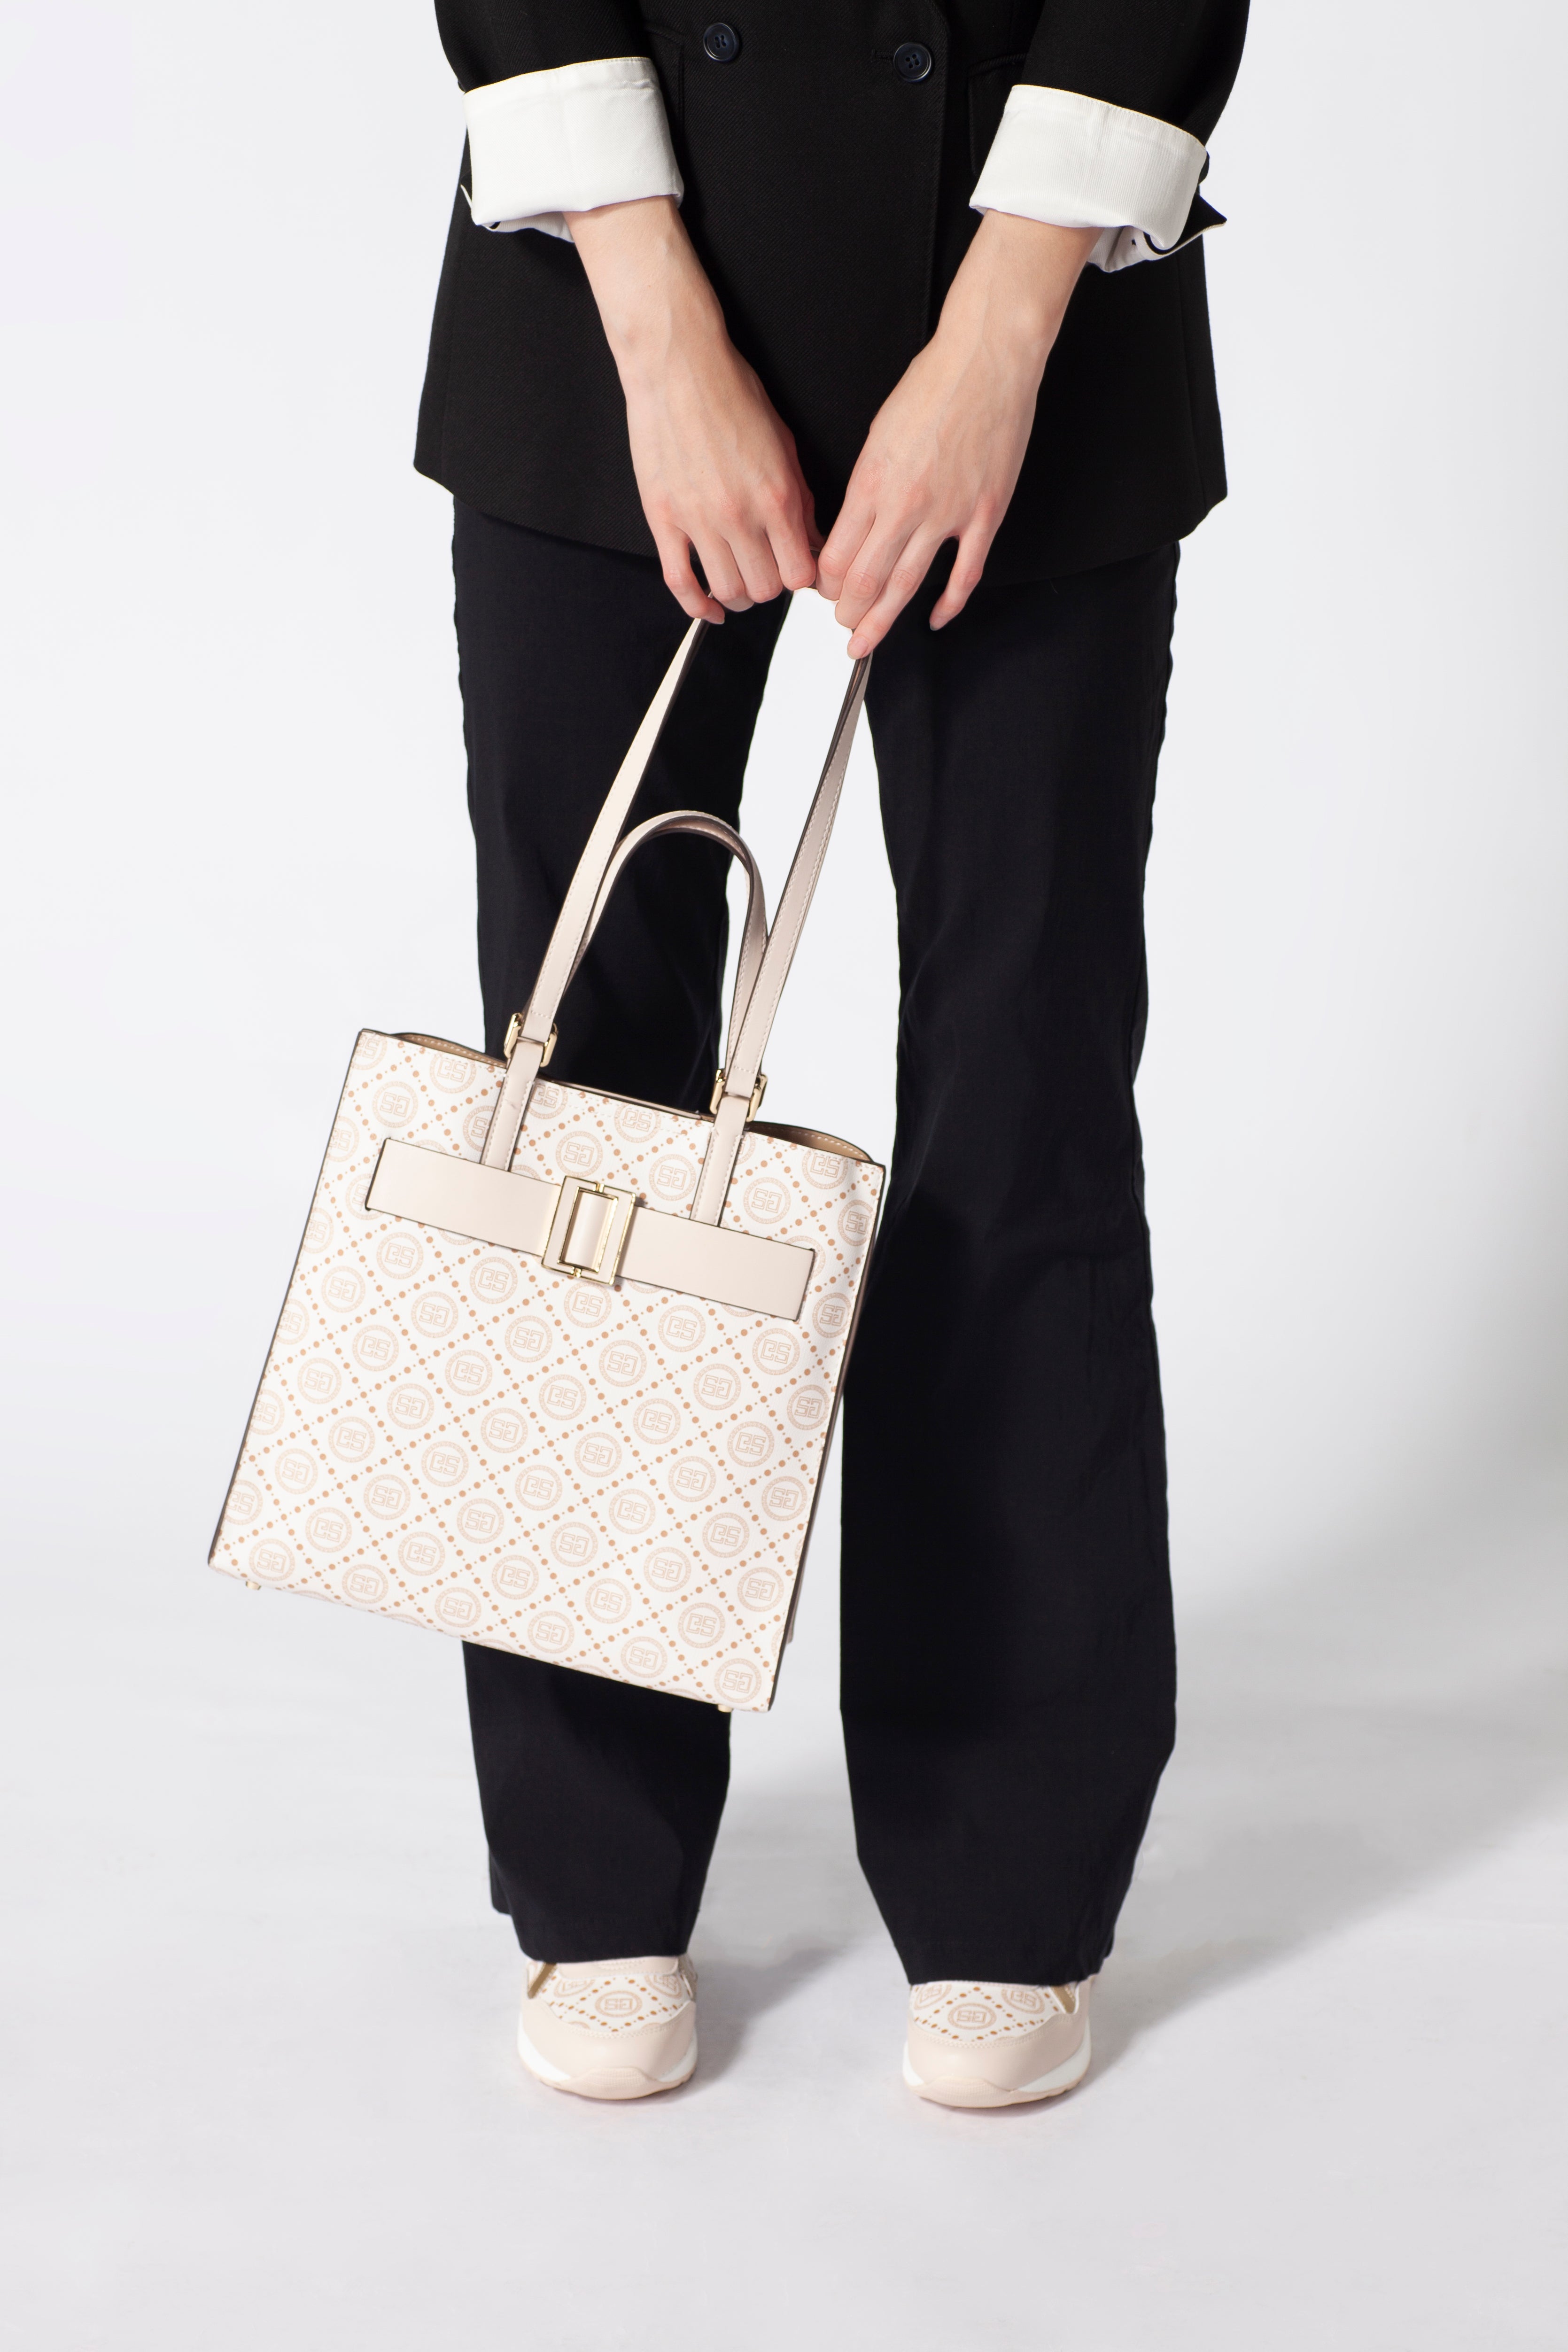 A luxurious and spacious tote bag - luxurious leather, 30 cm wide